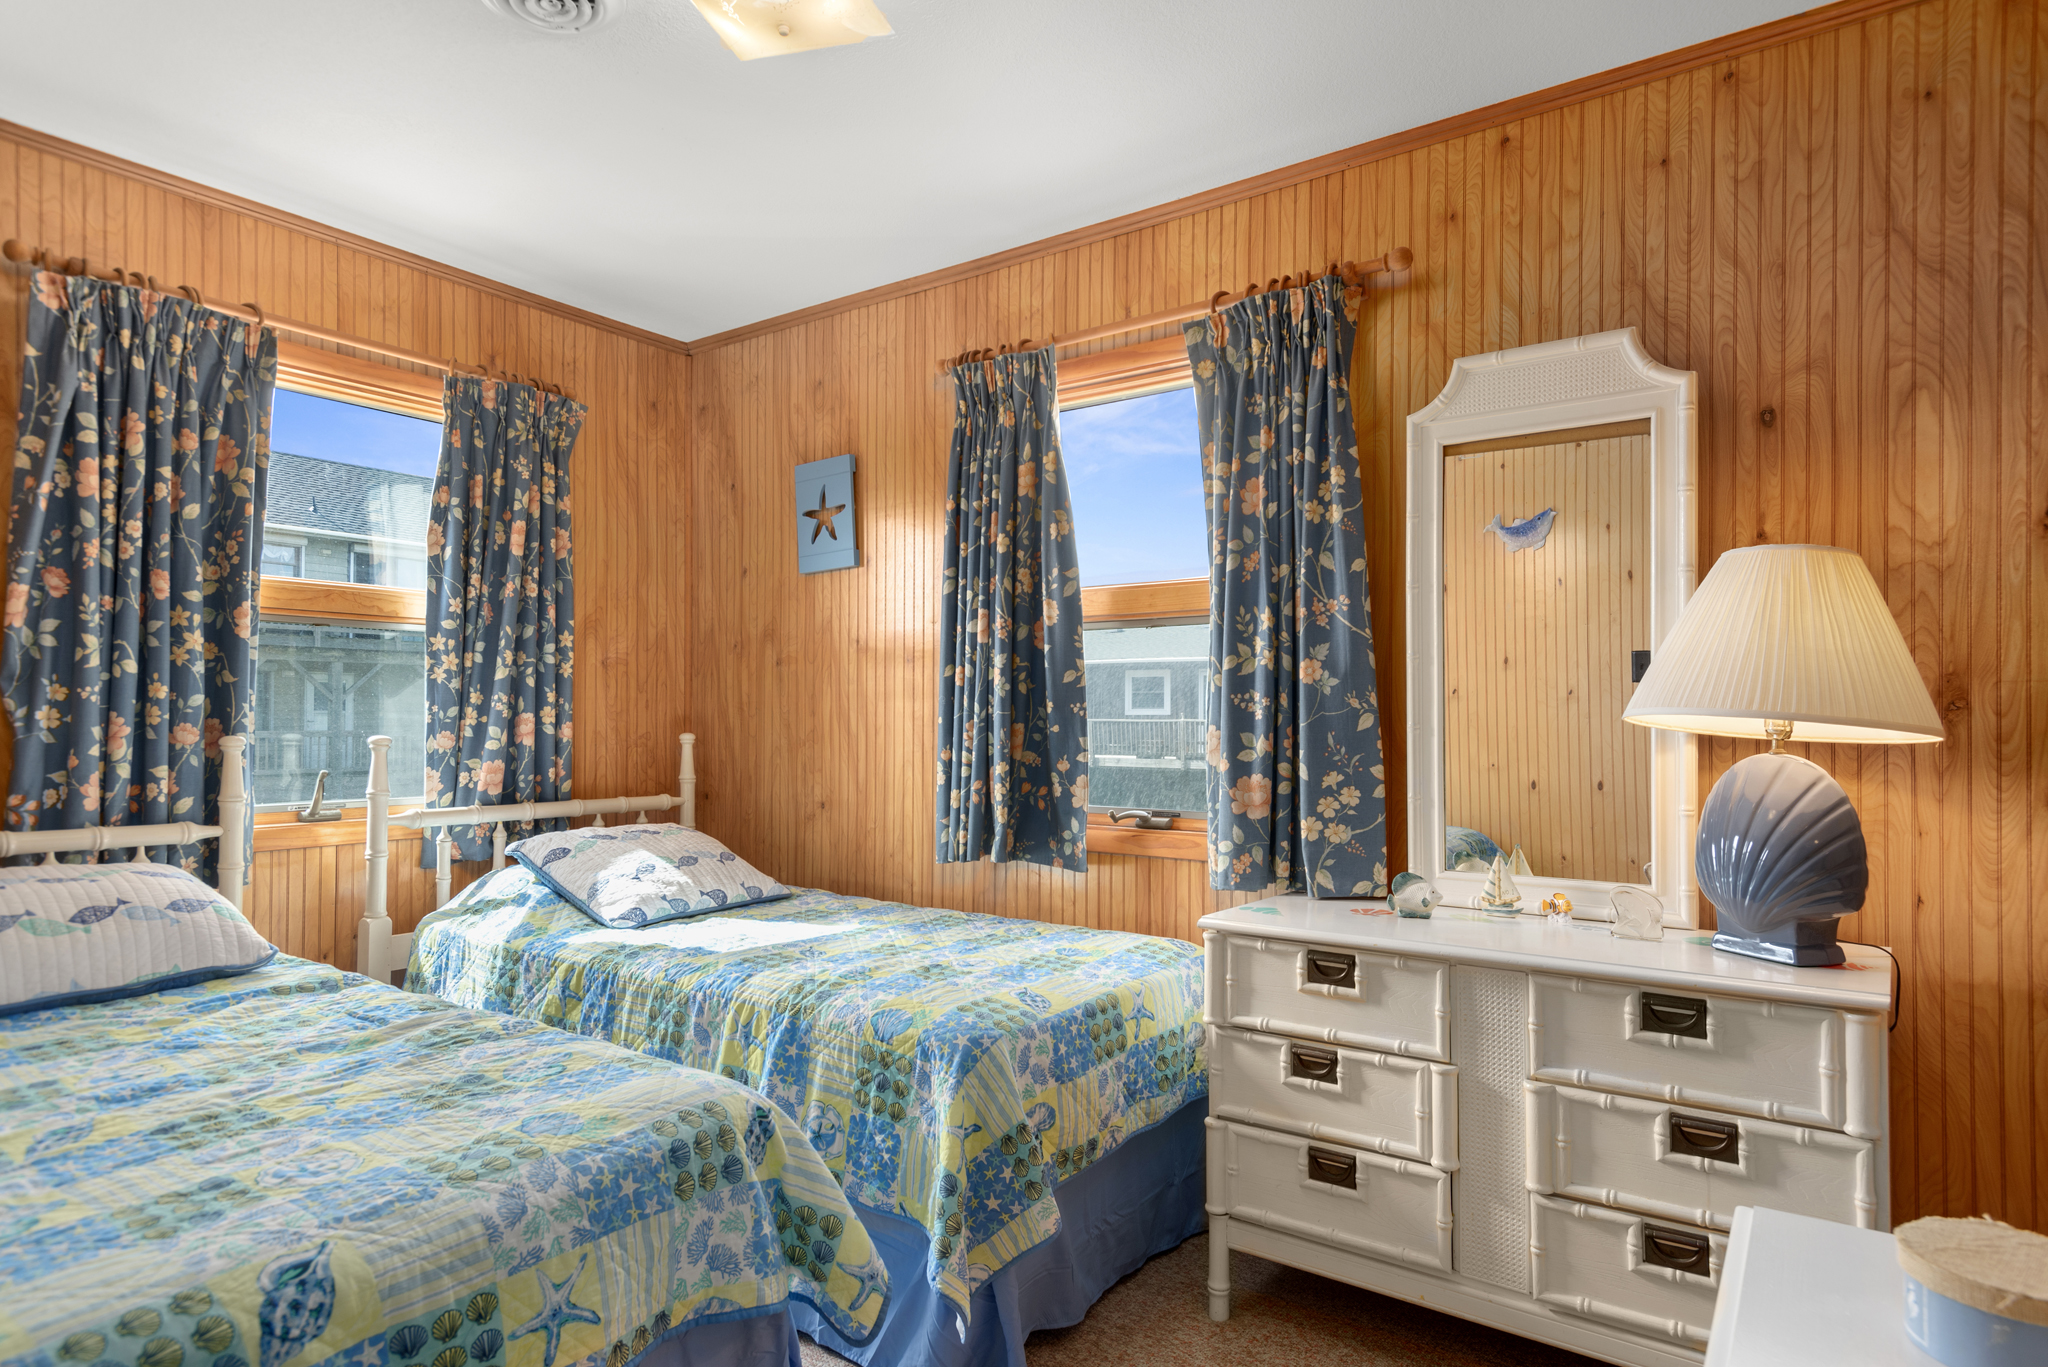 SN0407: Sailor's Rest at Nags Head l Mid Level Bedroom 1